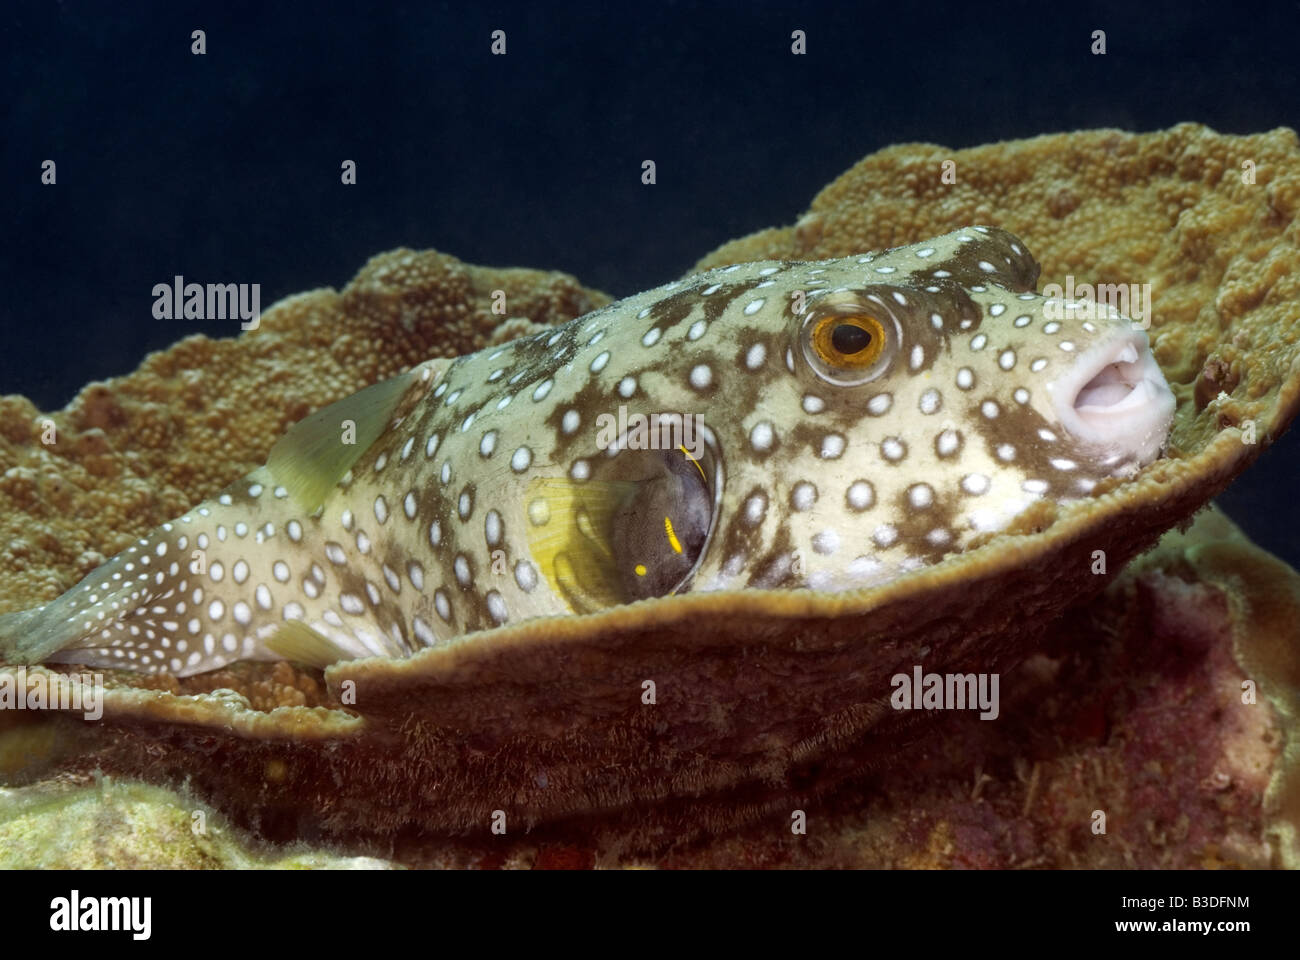 Pufferfish sitting in a vase coral under water Stock Photo